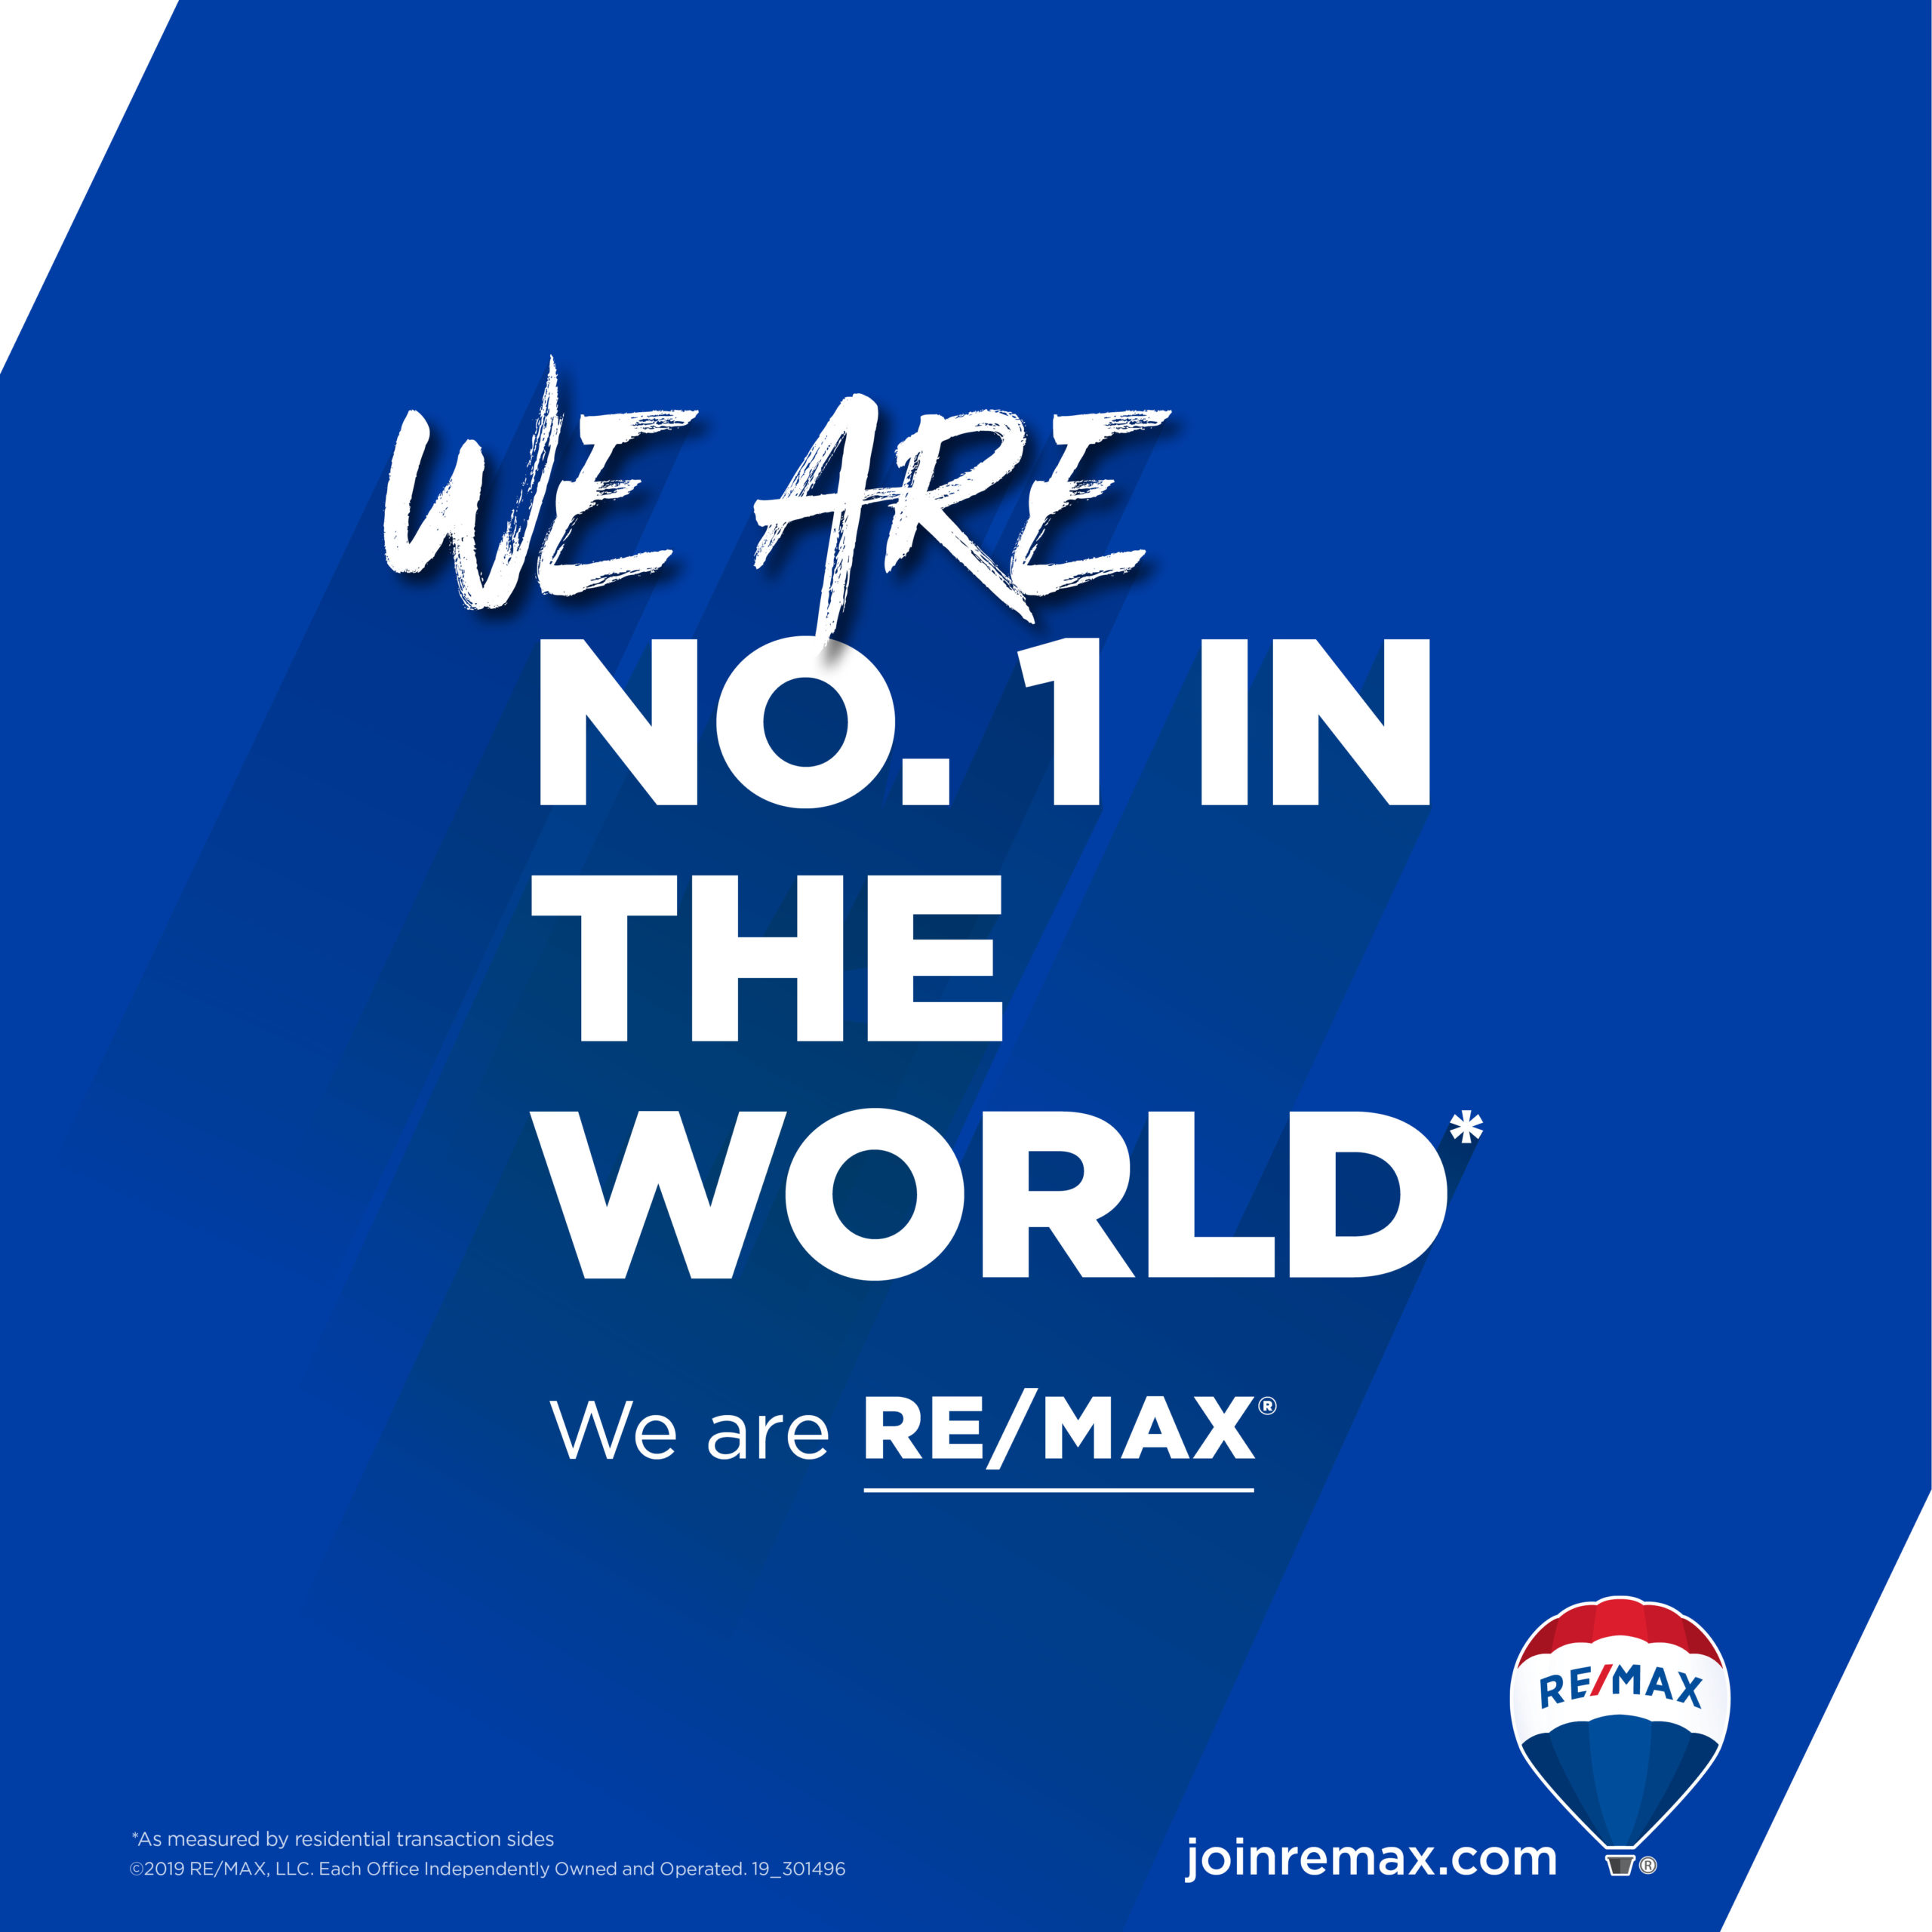 Buy your Vacation Rental with RE/MAX Costa Rica